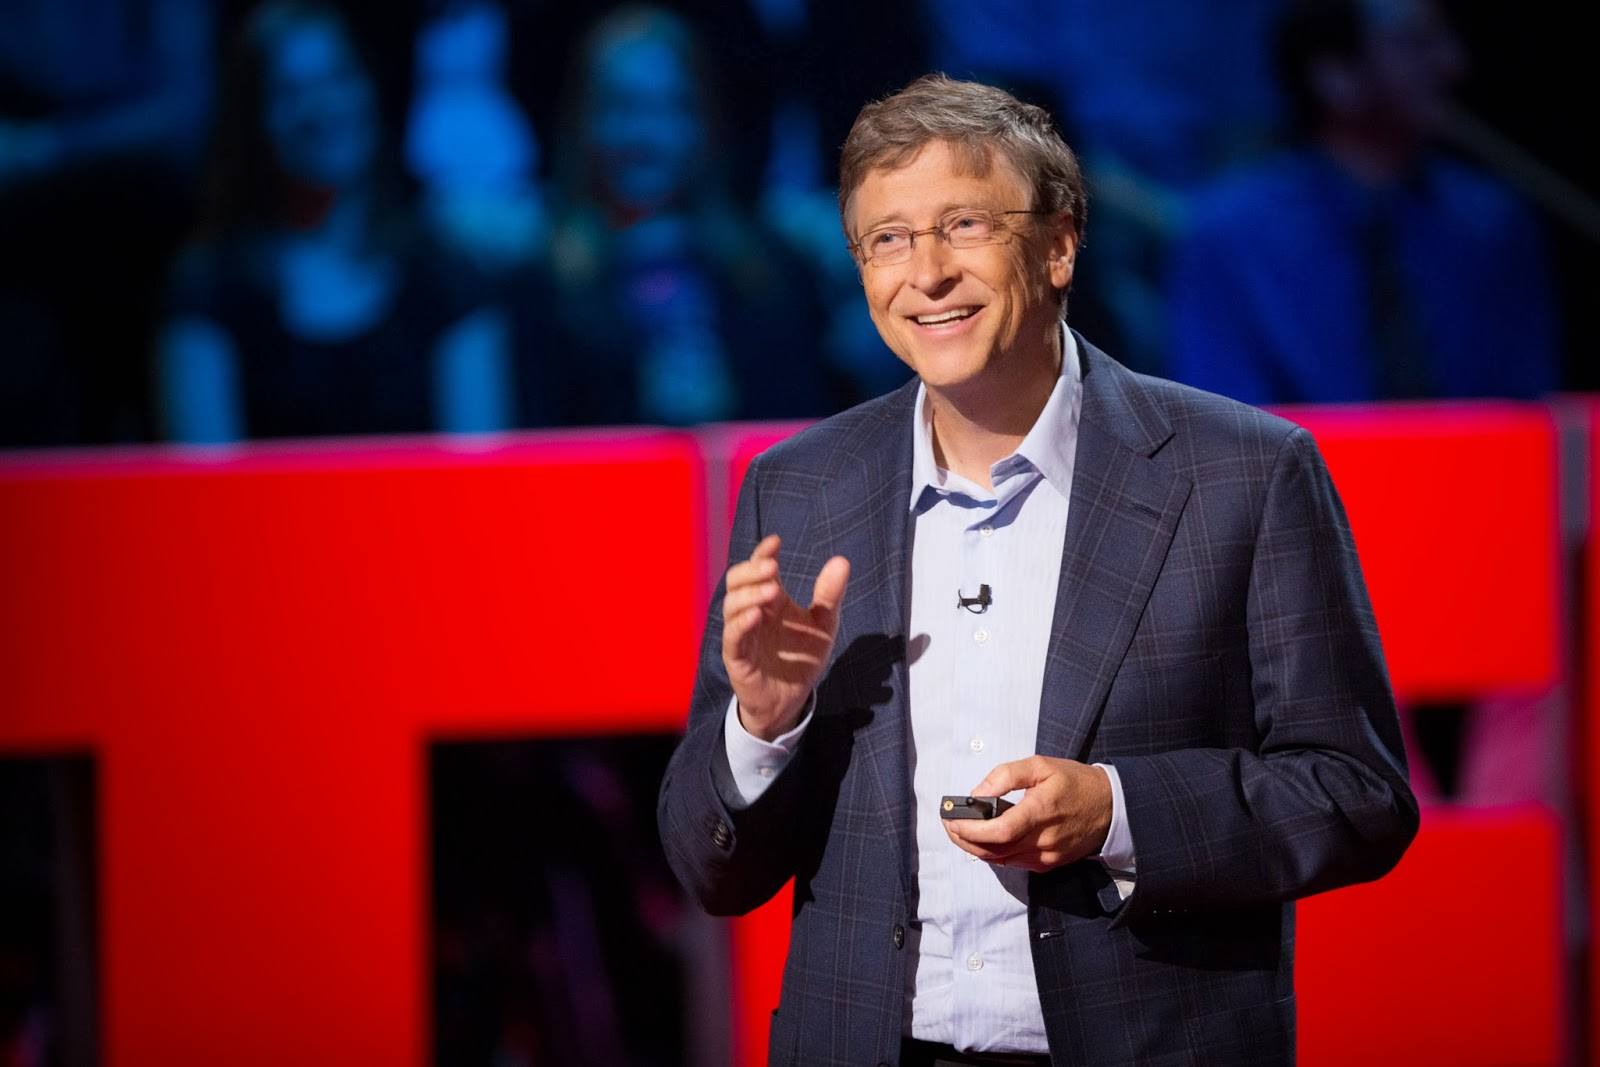 Become An Eloquent Speaker By Applying 3 Critical Secrets From The Most Successful TED Talks